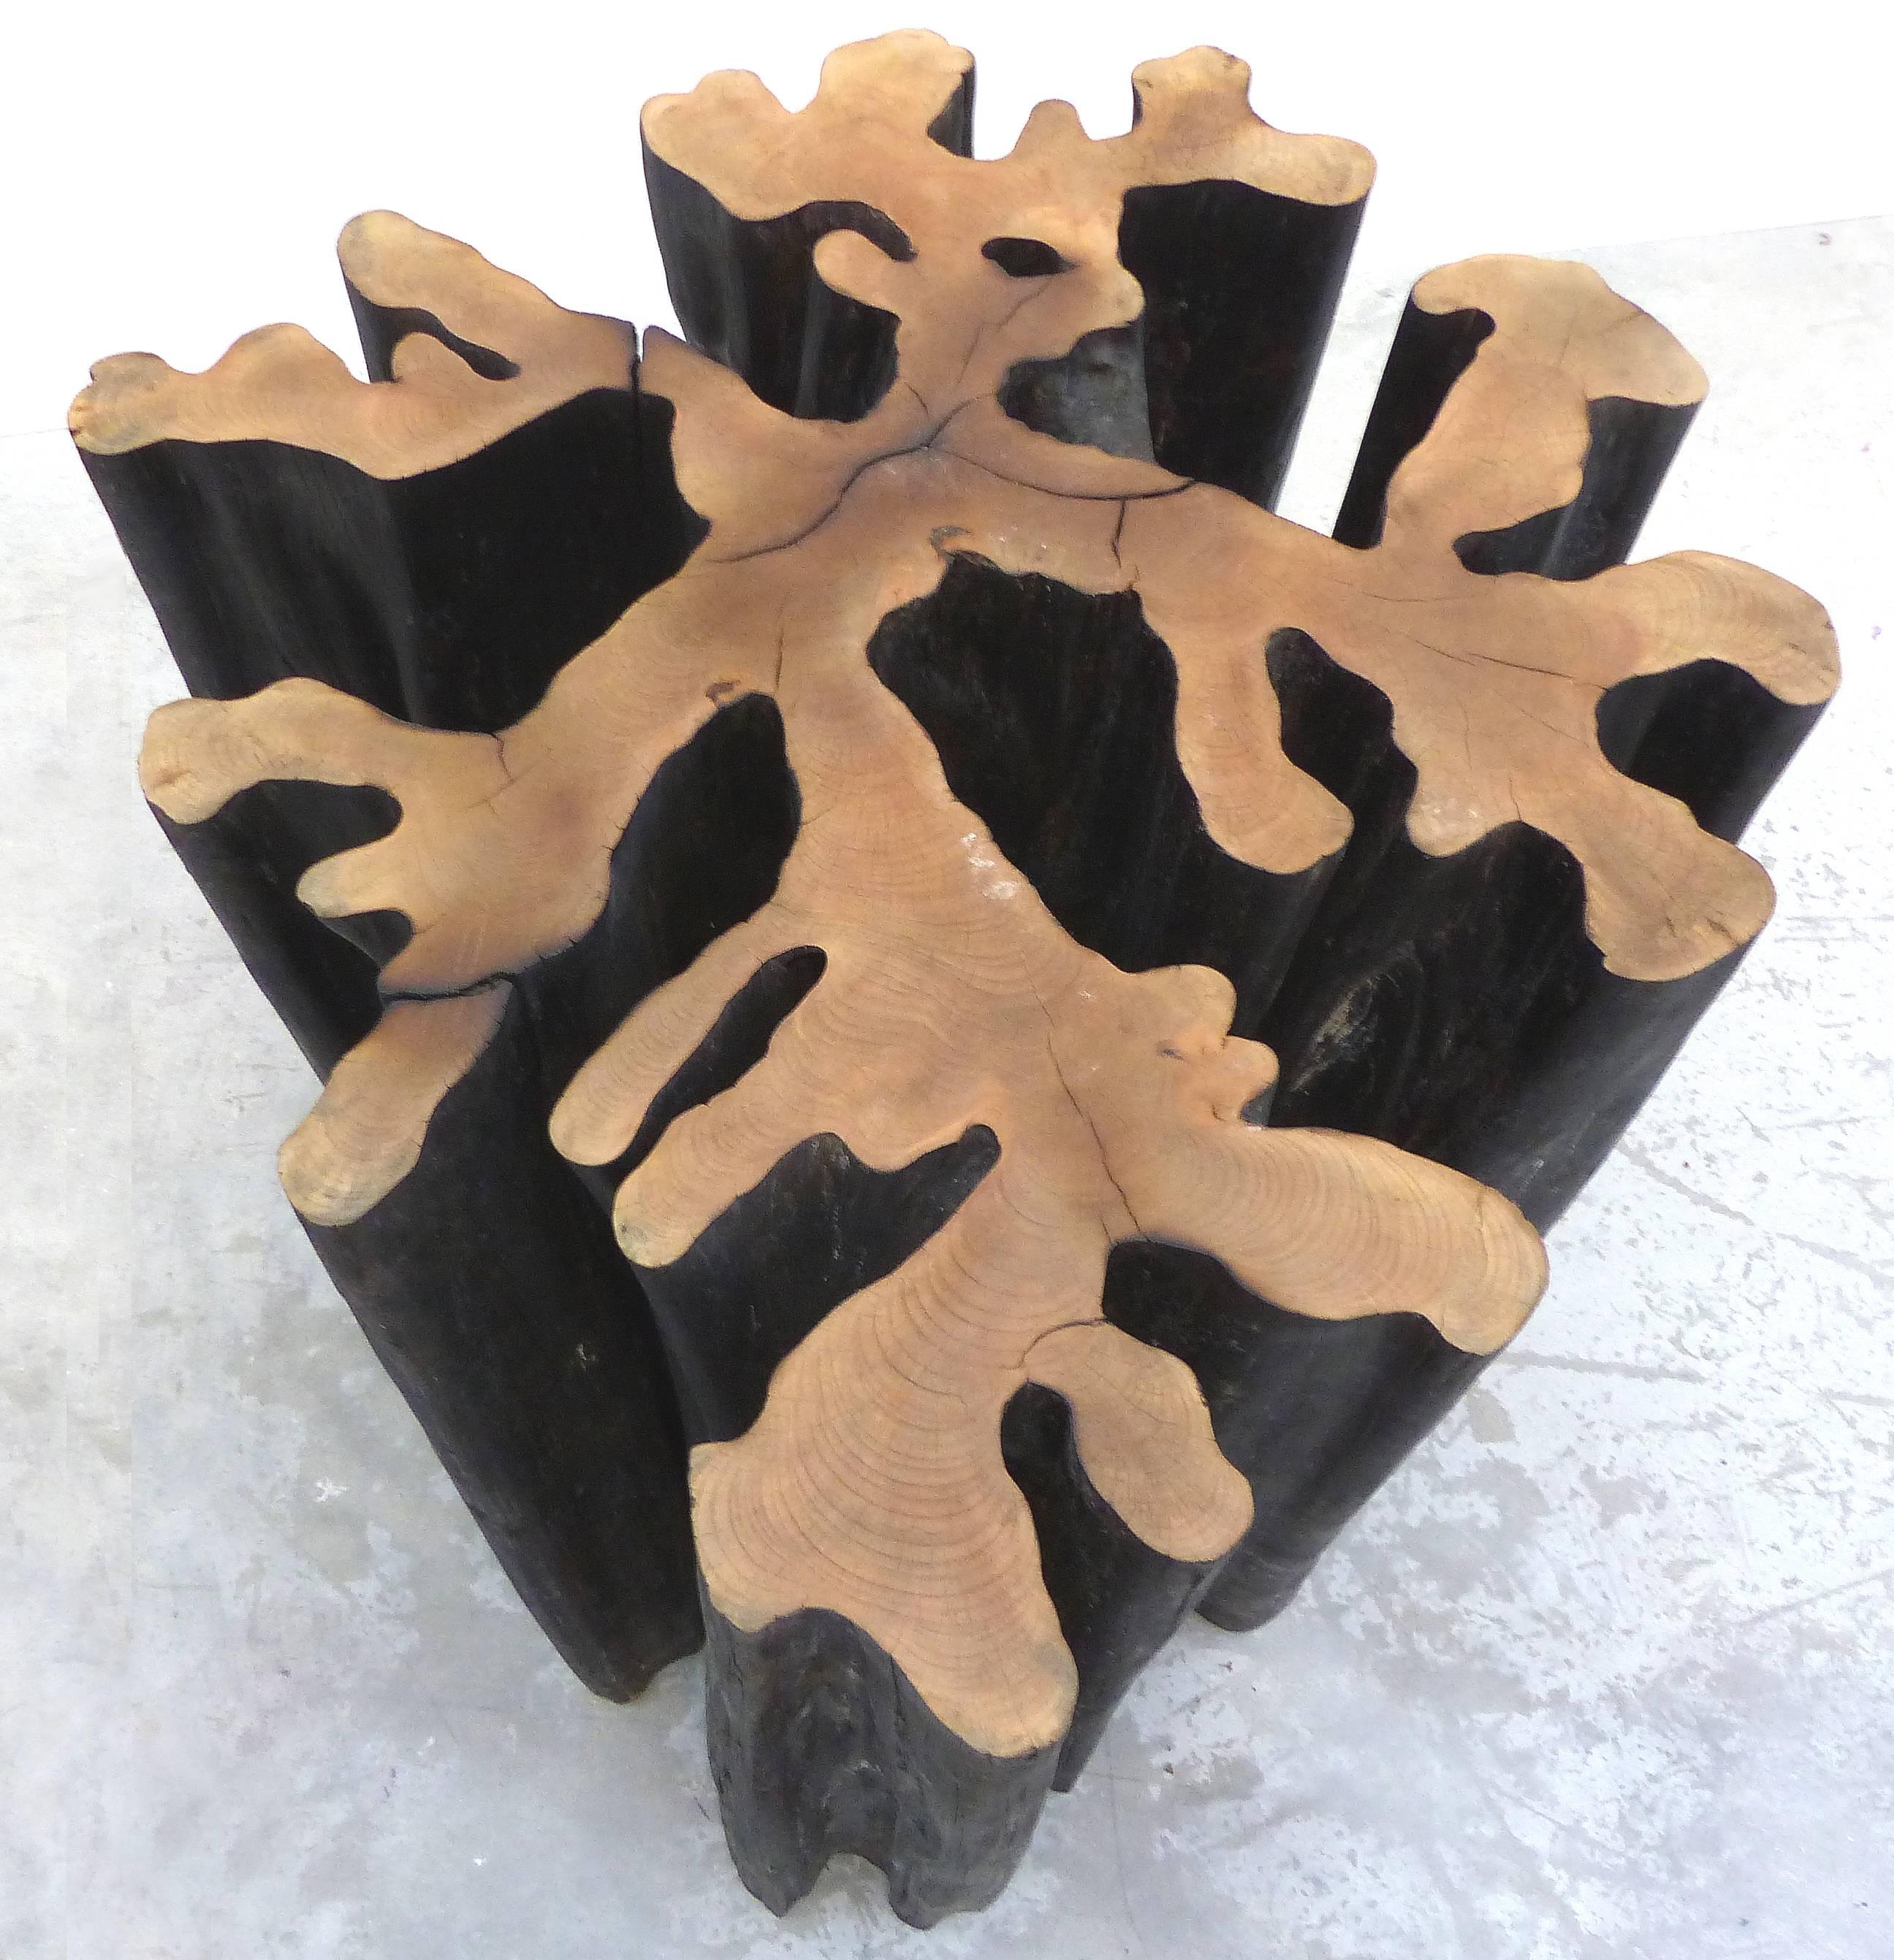 Offered is a table base of reclaimed wood from the Brazilian Amazon.
The species of this wood is Esenbeckia leiocarpa which is a semi deciduous tree with a dense, rounded crown; it can grow 60-90 feet tall. The tree yields a high quality wood and